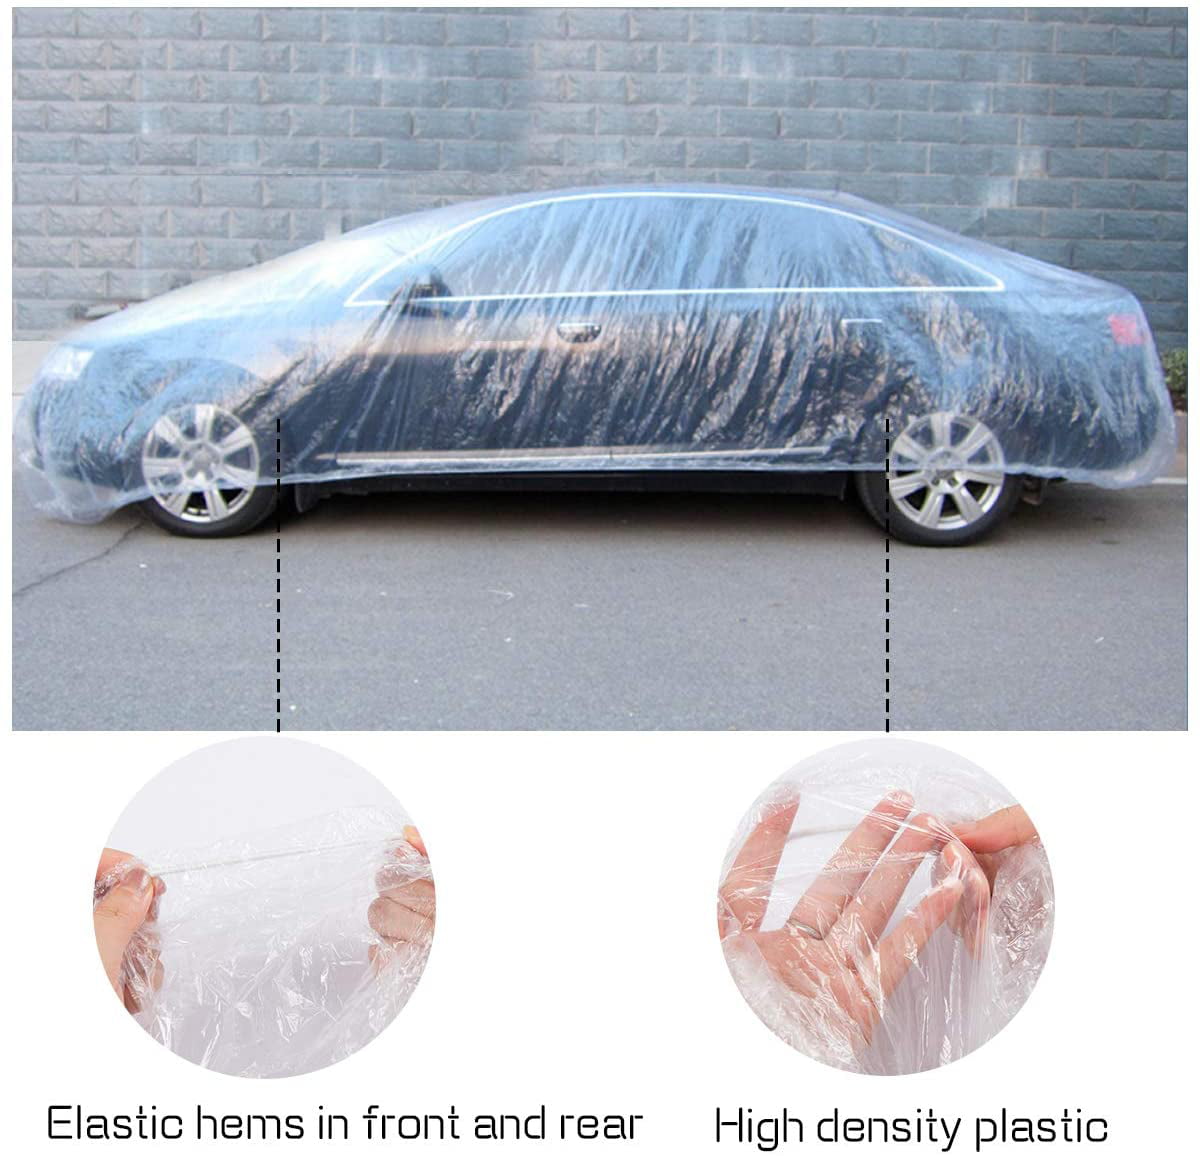 PAMASE 2 Set of Thicken PE Plastic Car Cover 12.5 x 21.6 Disposable Car Cover with Elastic Band Clear Waterproof Dustproof Car Protective Cover for All Brands of Sedan Cars